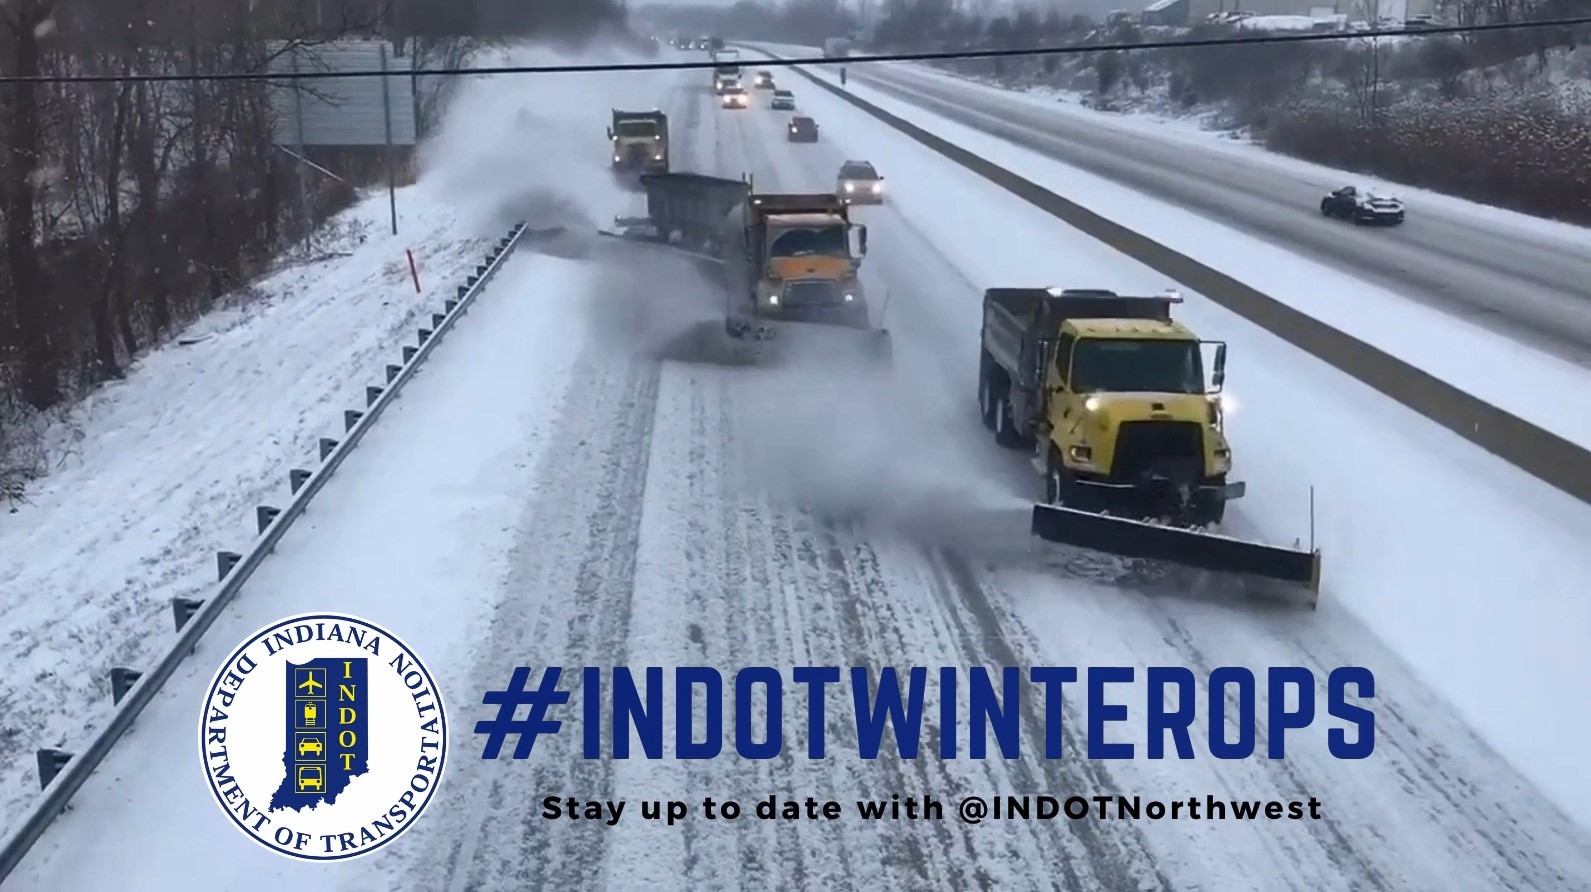 INDOT Northwest announces full call out for winter storm